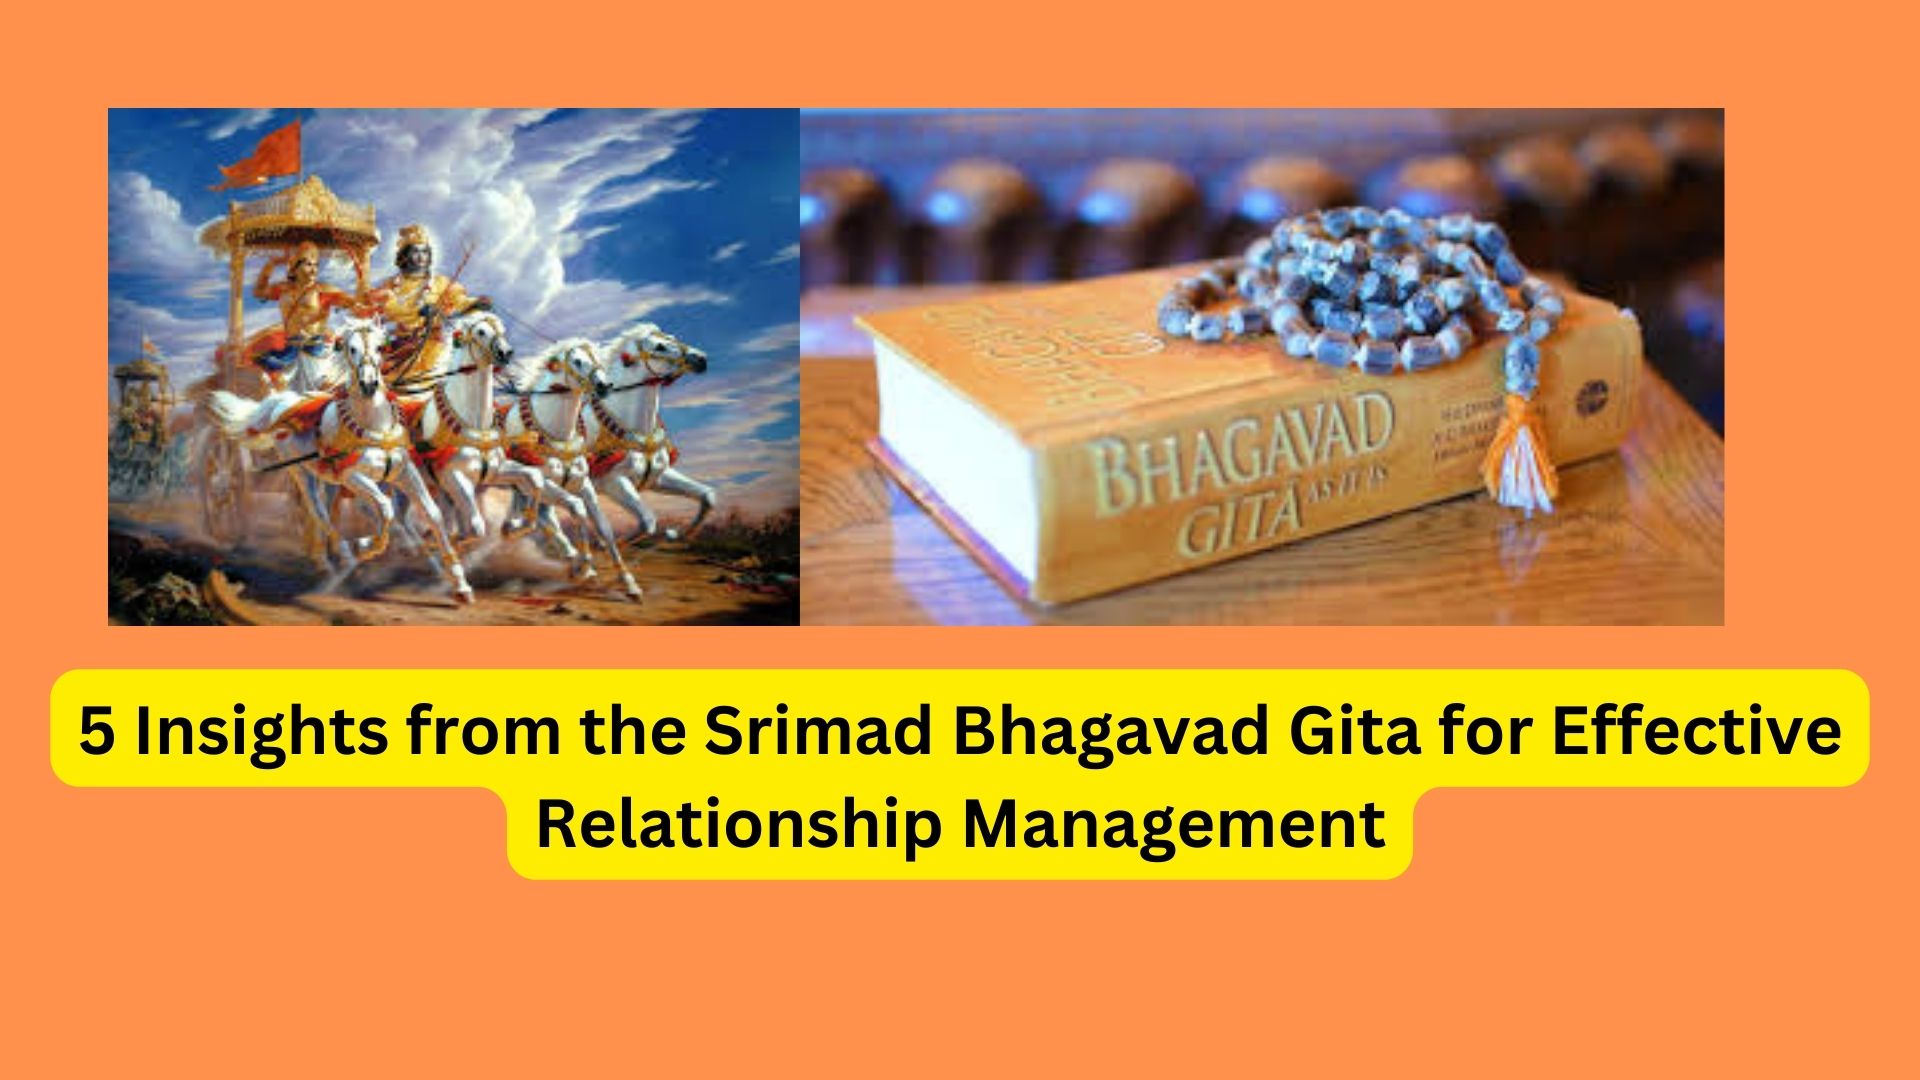 5 Insights from the Srimad Bhagavad Gita for Effective Relationship Management